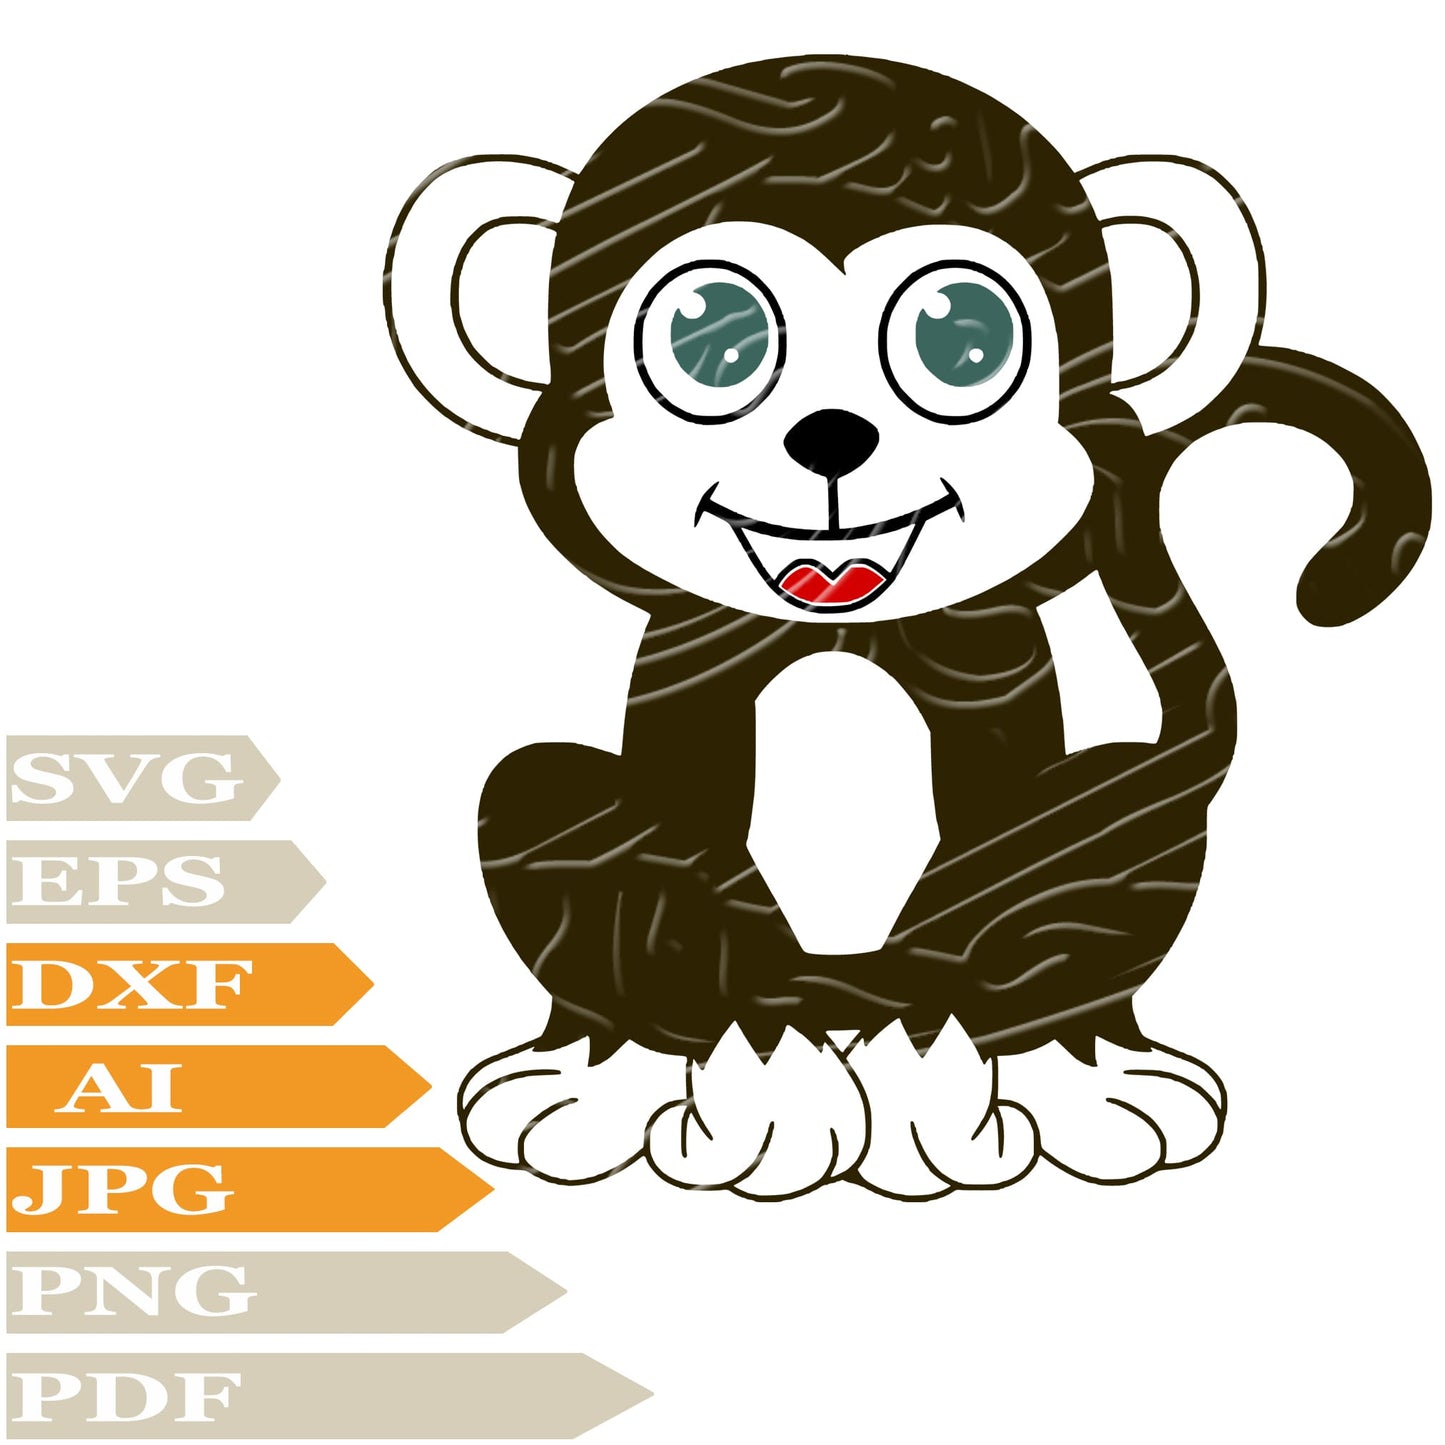 Monkey, Funny Monkey Svg File, Image Cut, Png, For Tattoo, Silhouette, Digital Vector Download, Cut File, Clipart, For Cricut